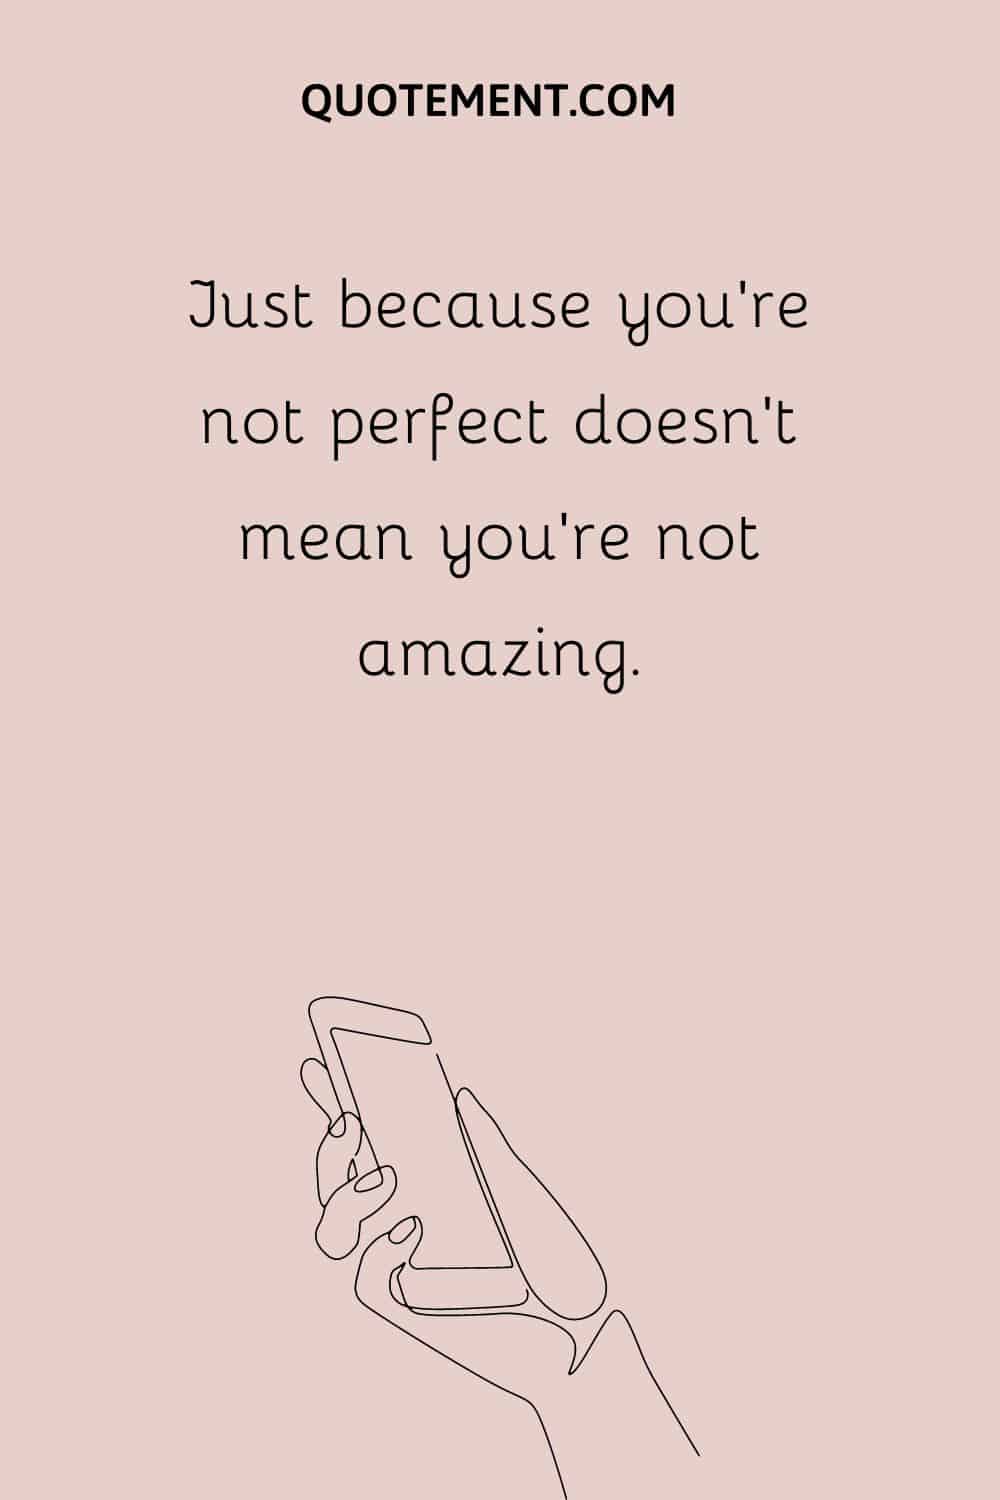 Just because you're not perfect doesn't mean you're not amazing